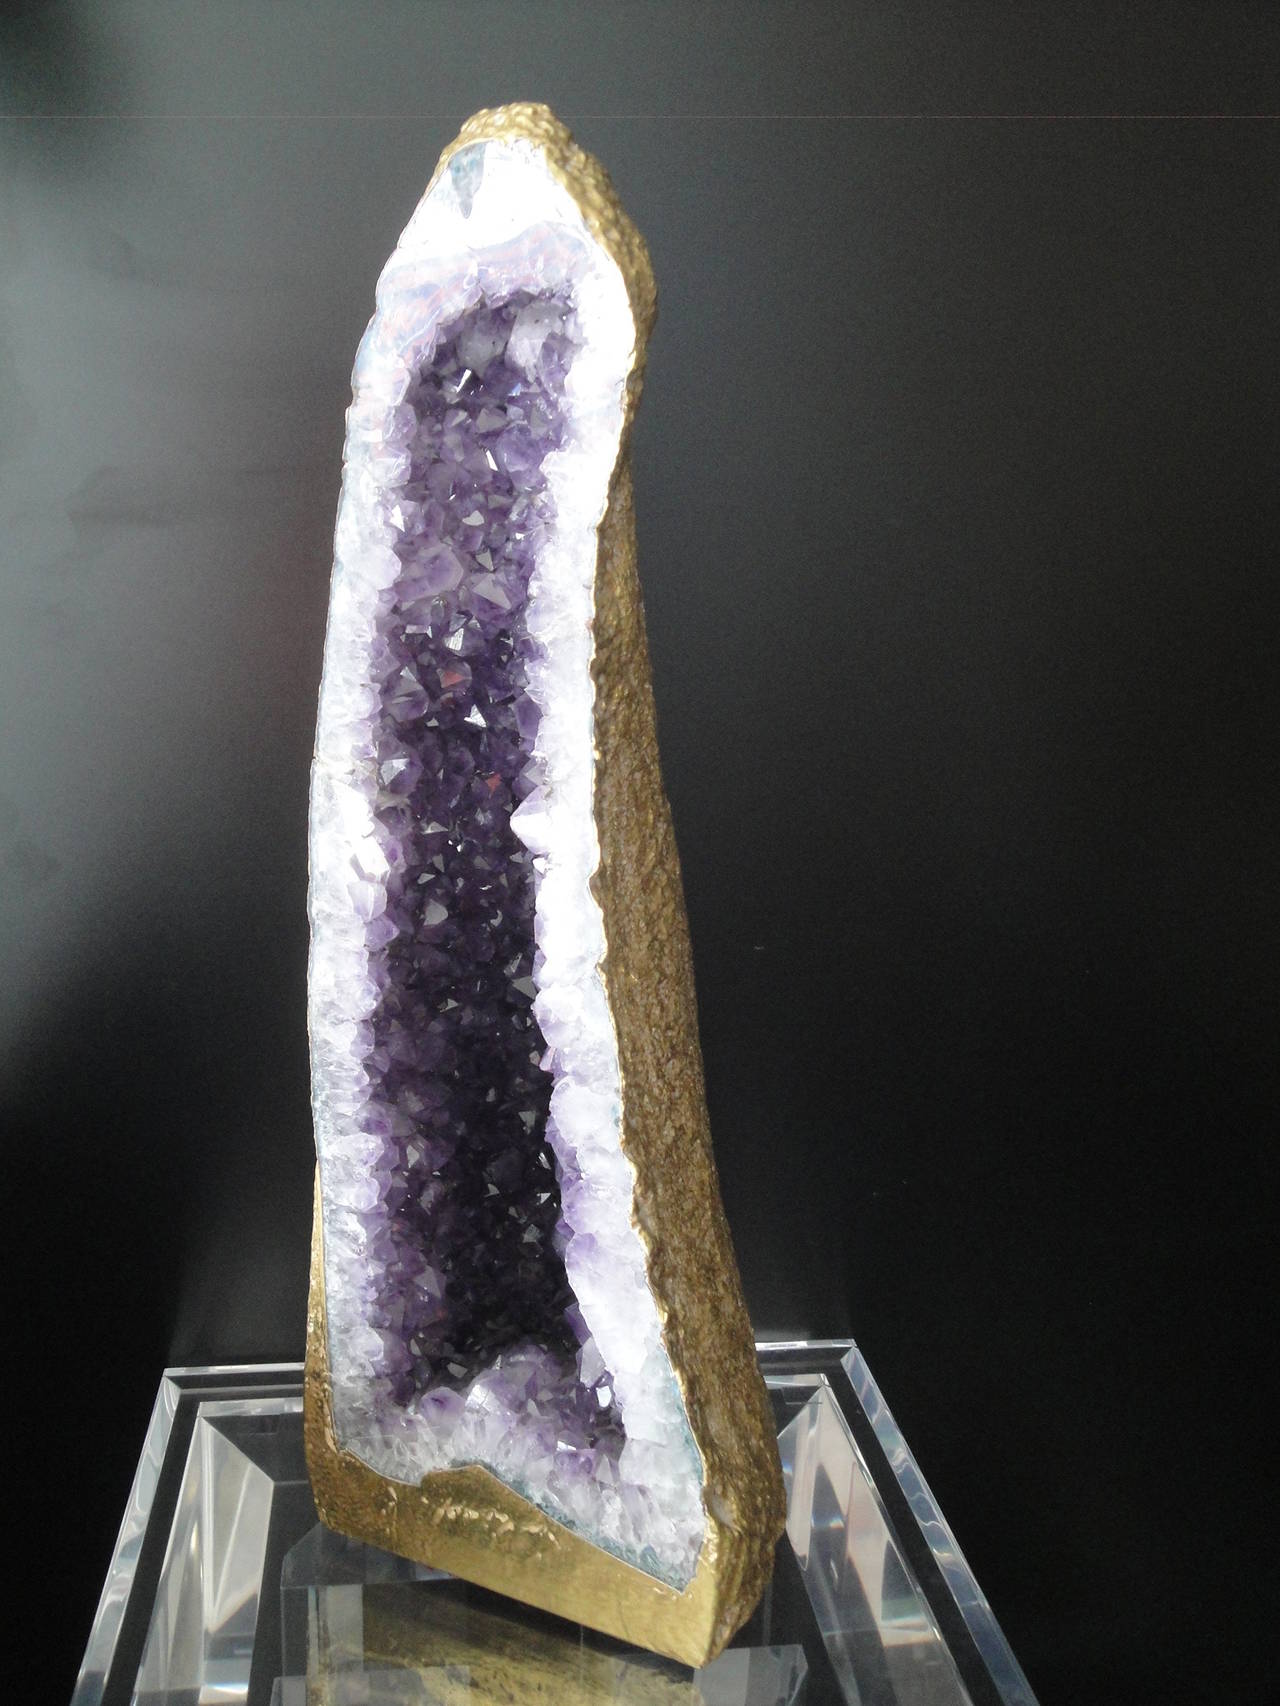 Decorative amethyst geode in 22-karat gold leaf
Shows a old internal repair not very visible to photograph.

Offered at Gallery Girasole.